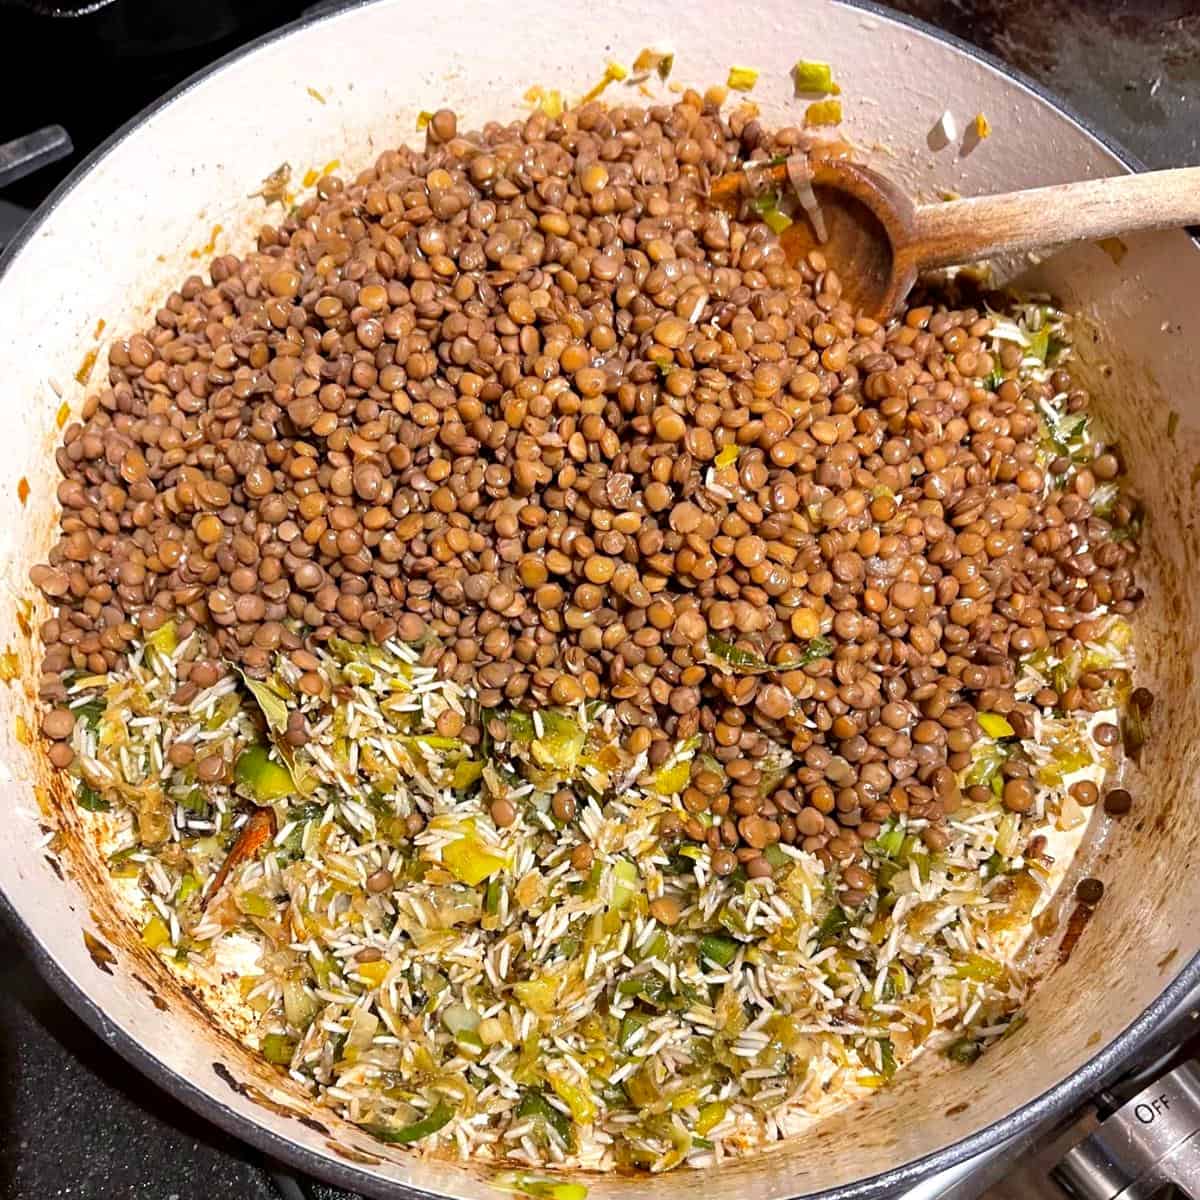 Lentils added to saucepan with leeks.